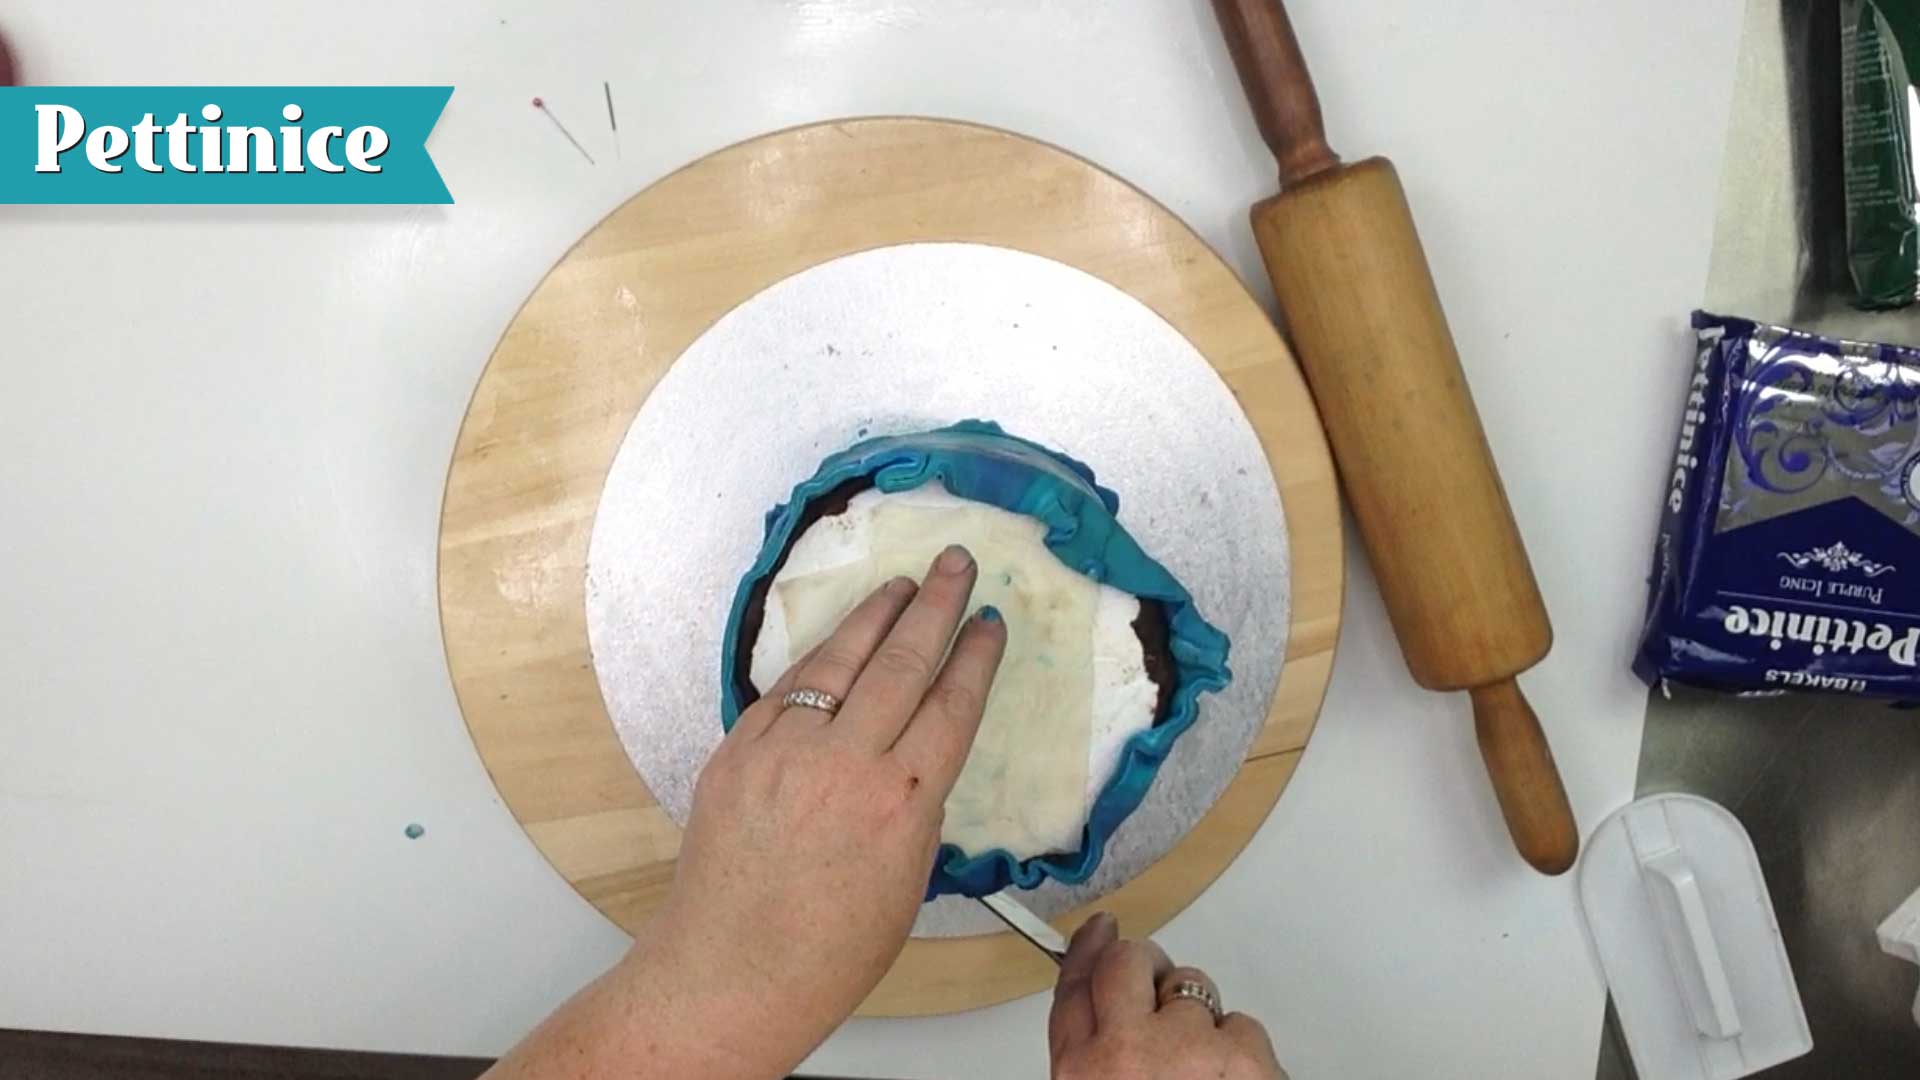 Keeping knife straight, trim off excess fondant.